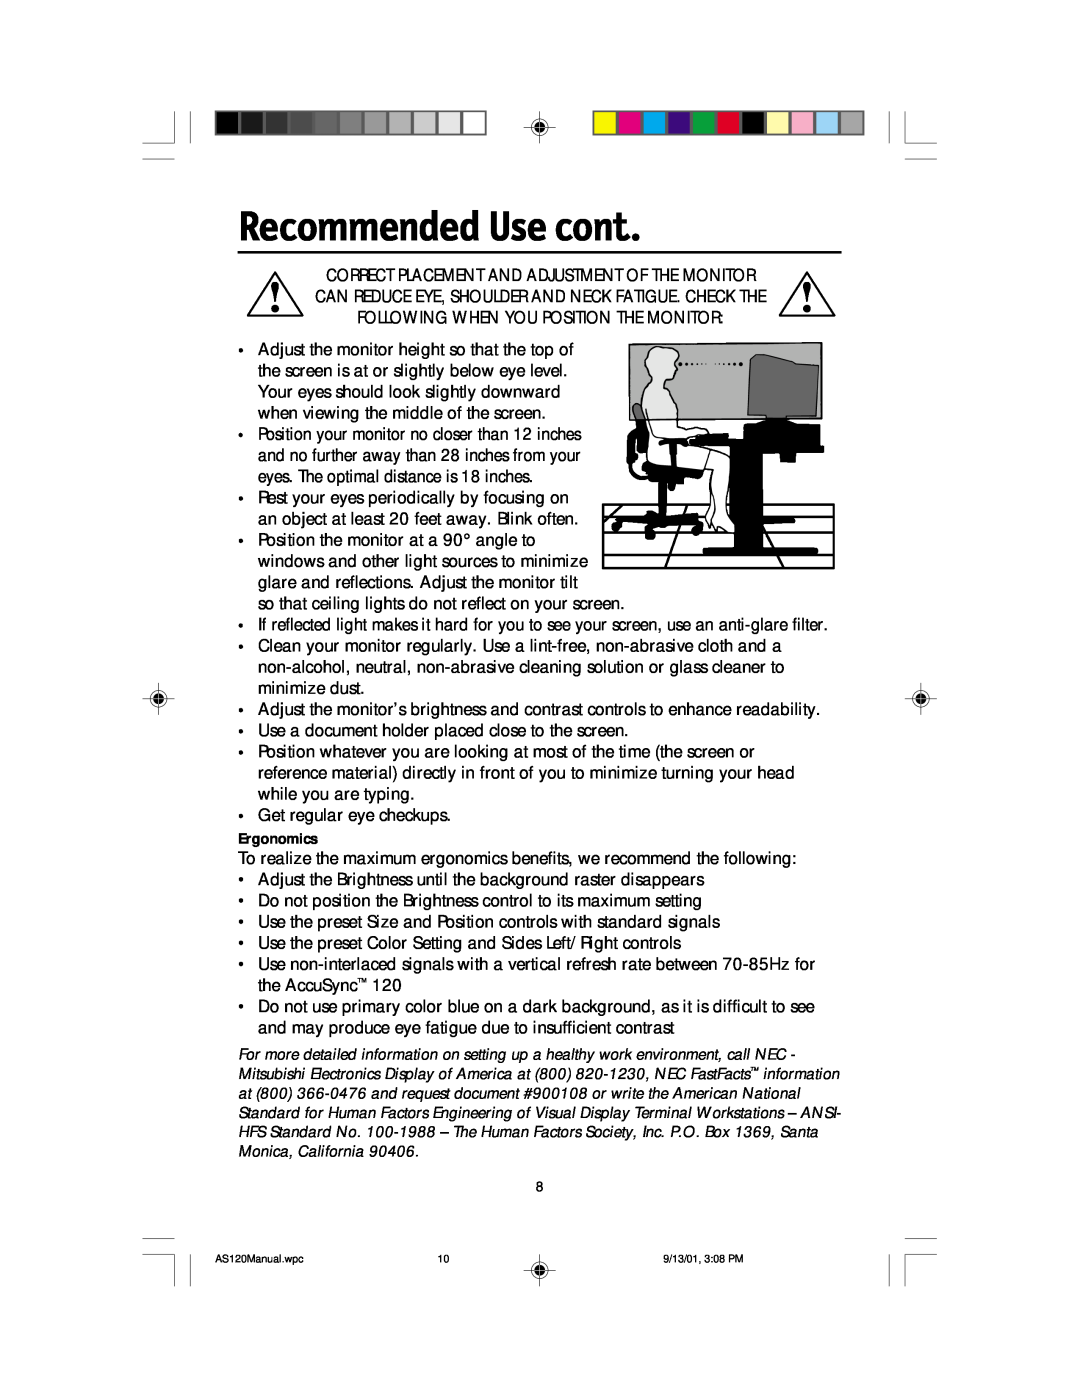 NEC AccuSync 120 user manual Recommended Use cont 